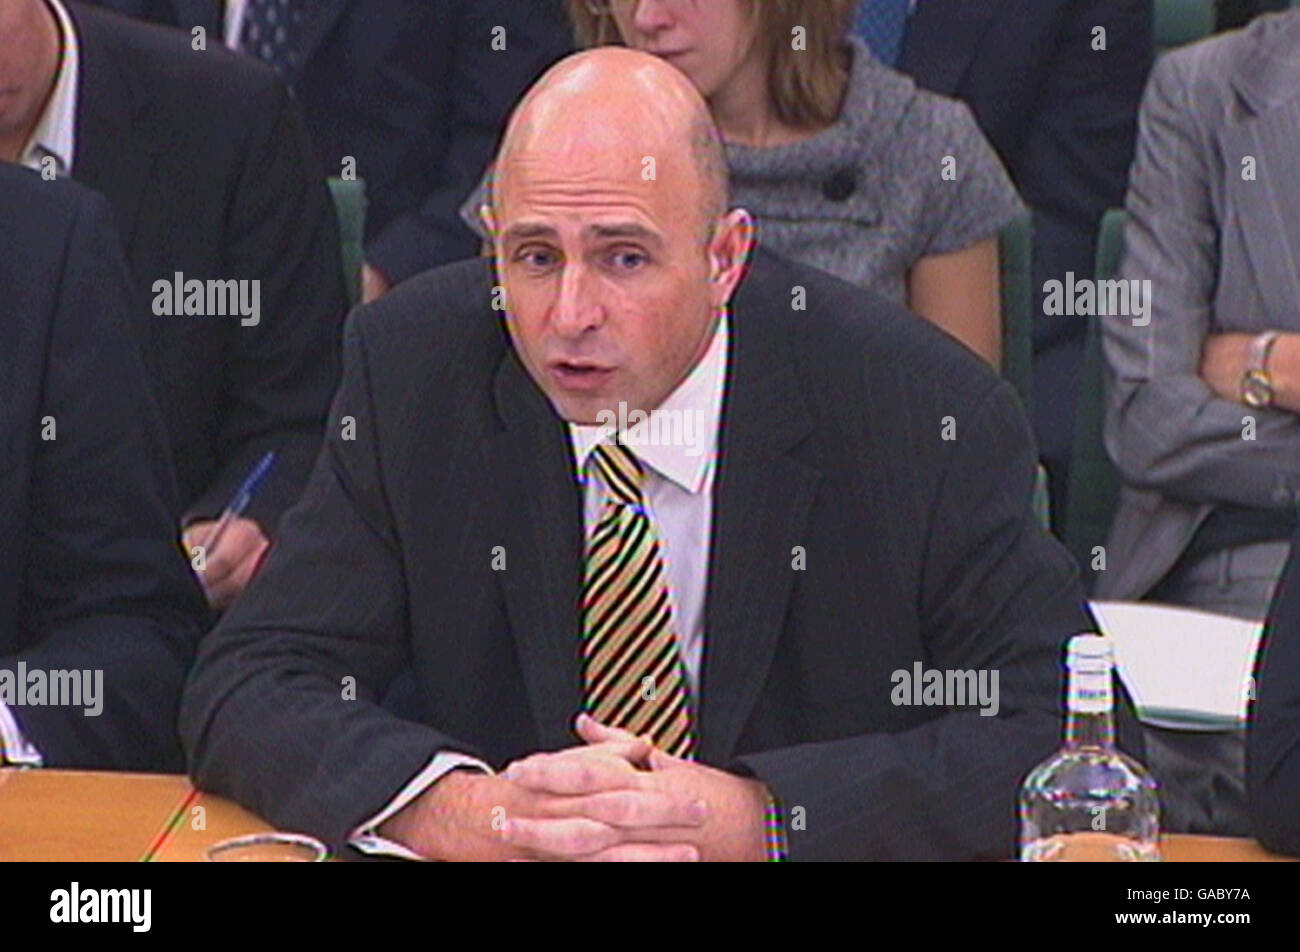 Video grab of Adam Applegarth, chief executive of Northern Rock, giving evidence to the House of Commons Treasury Committee. Stock Photo